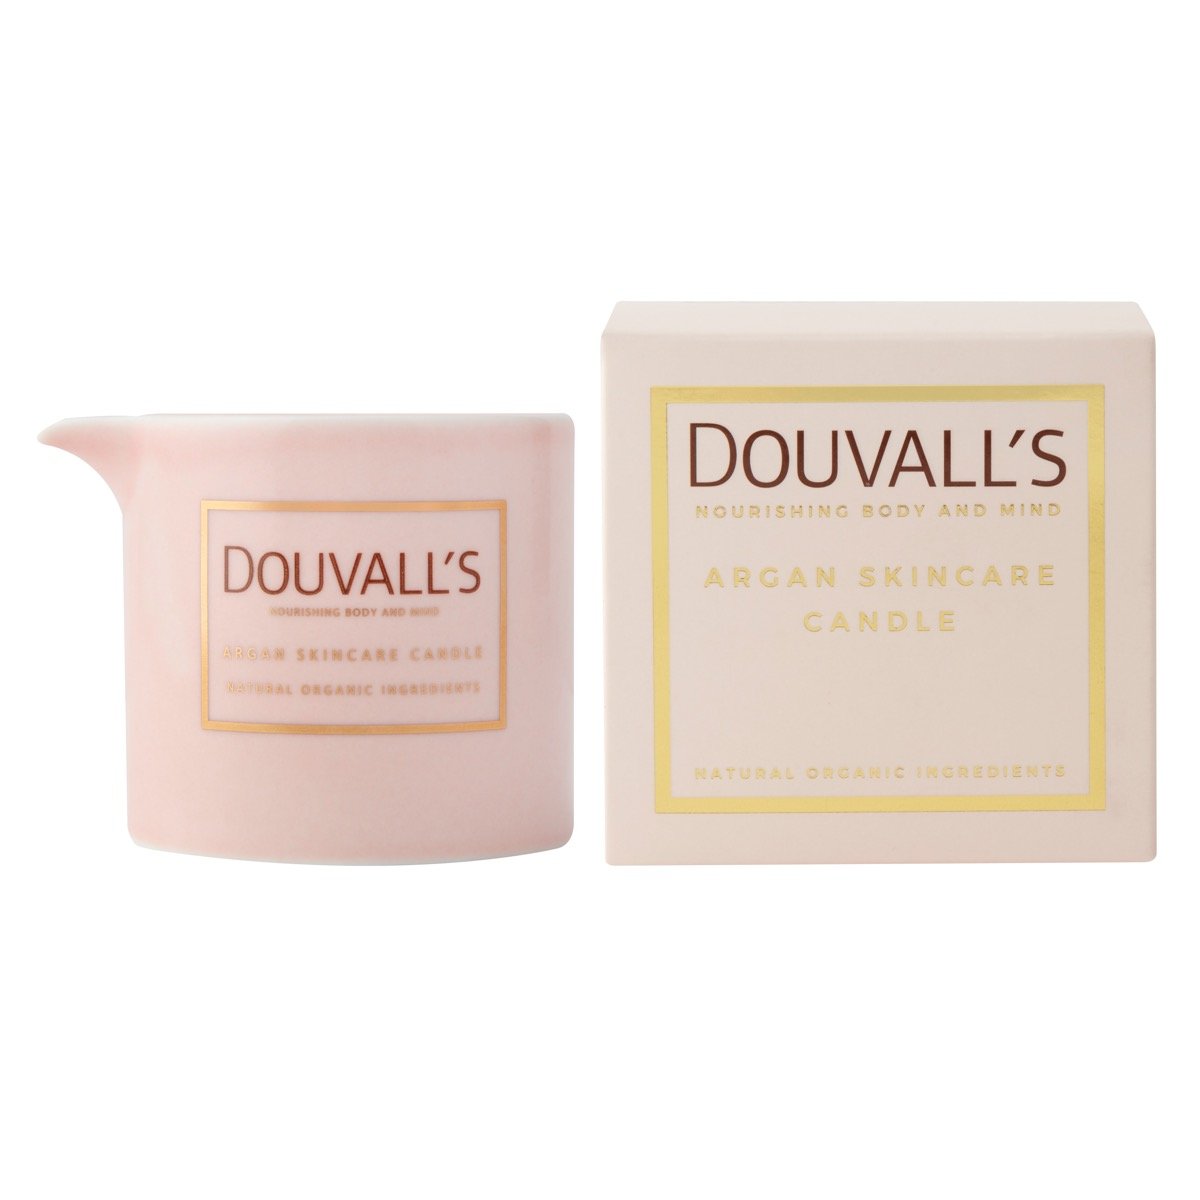 douvalls_candle_f.jpg